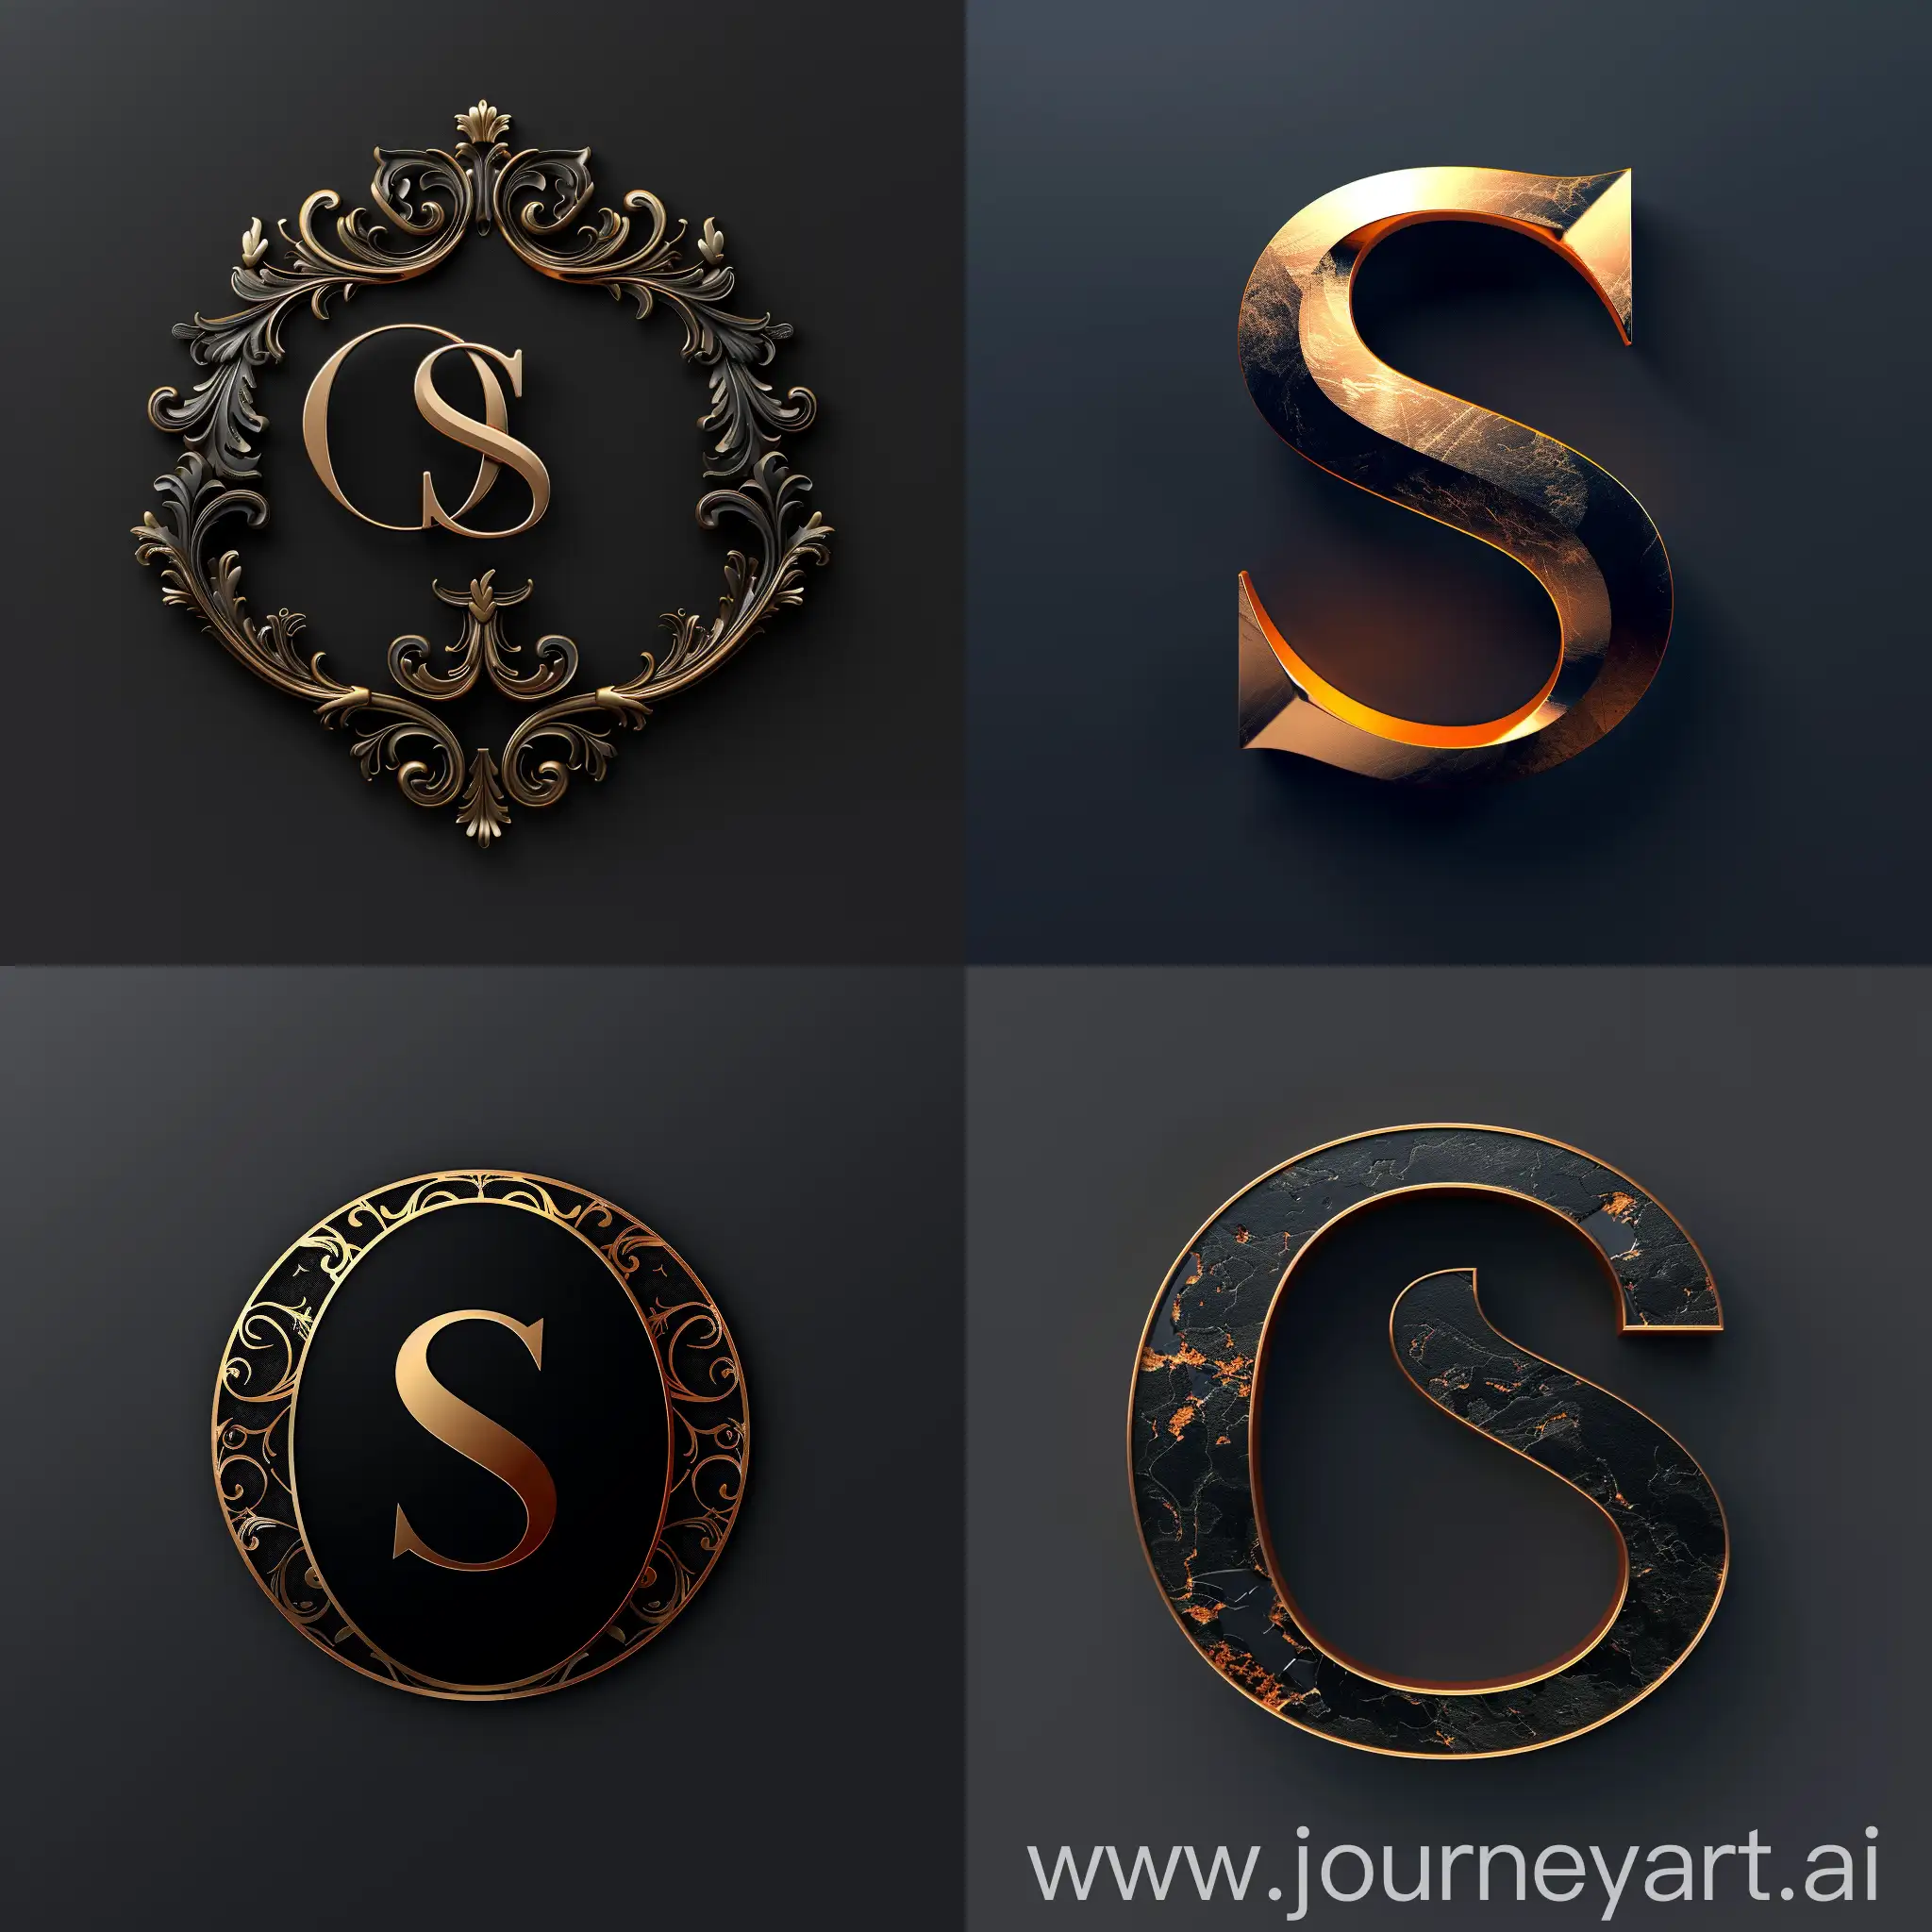 create a opulent software logo combining an O and S